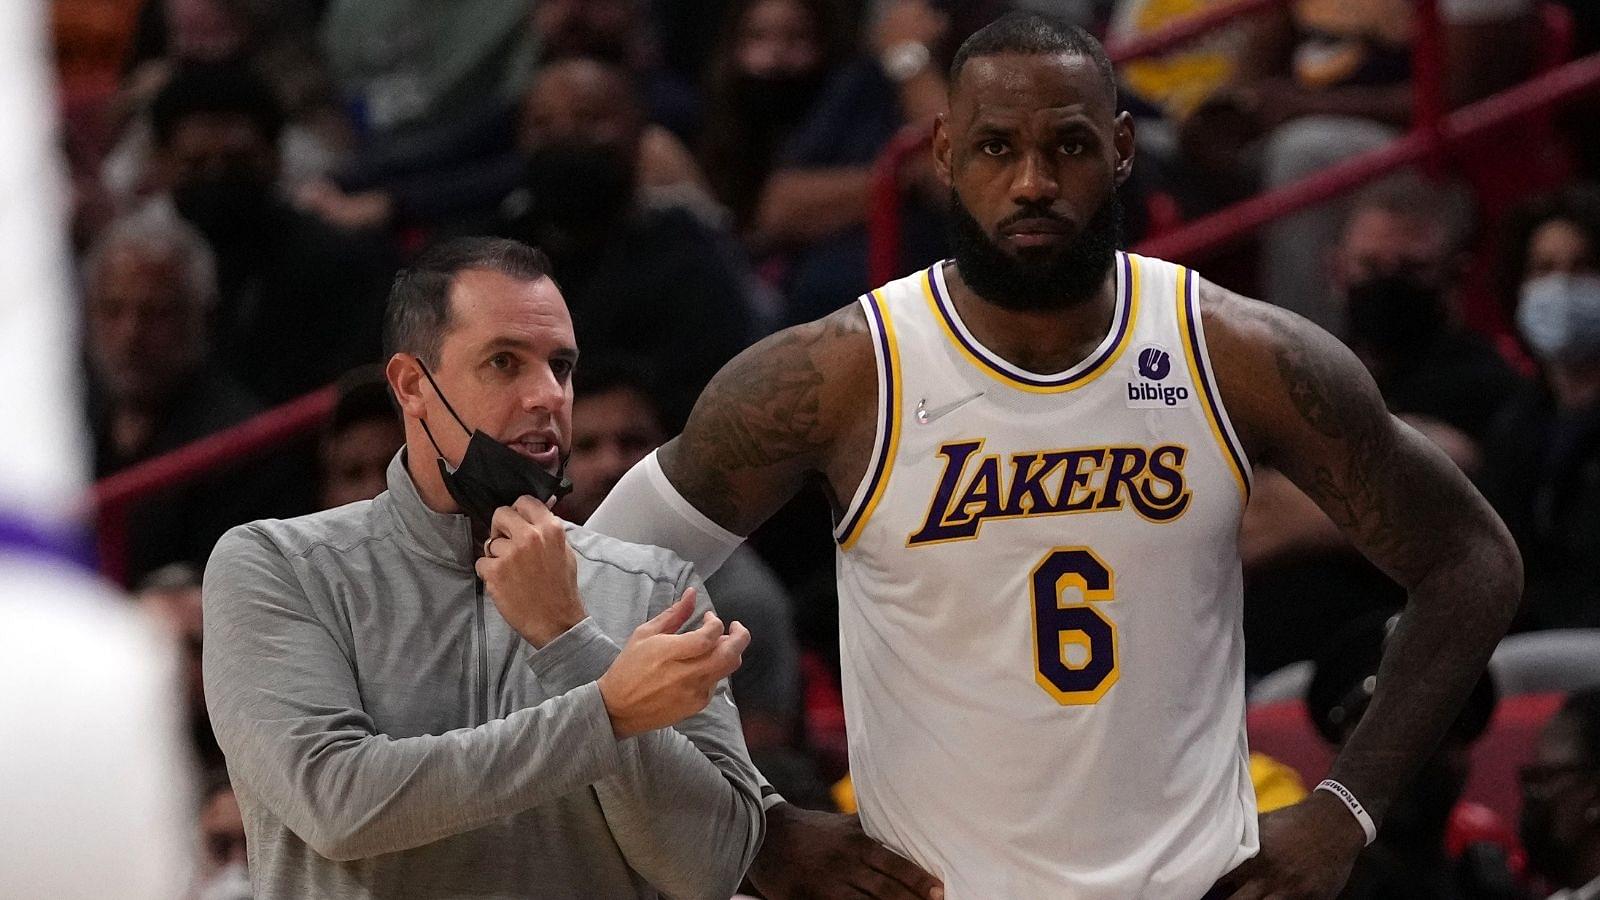 "Top 6 finish would be a long shot": Frank Vogel accesses Lakers chances of competing for the Playoffs, sees Play-in spots as more likely finish